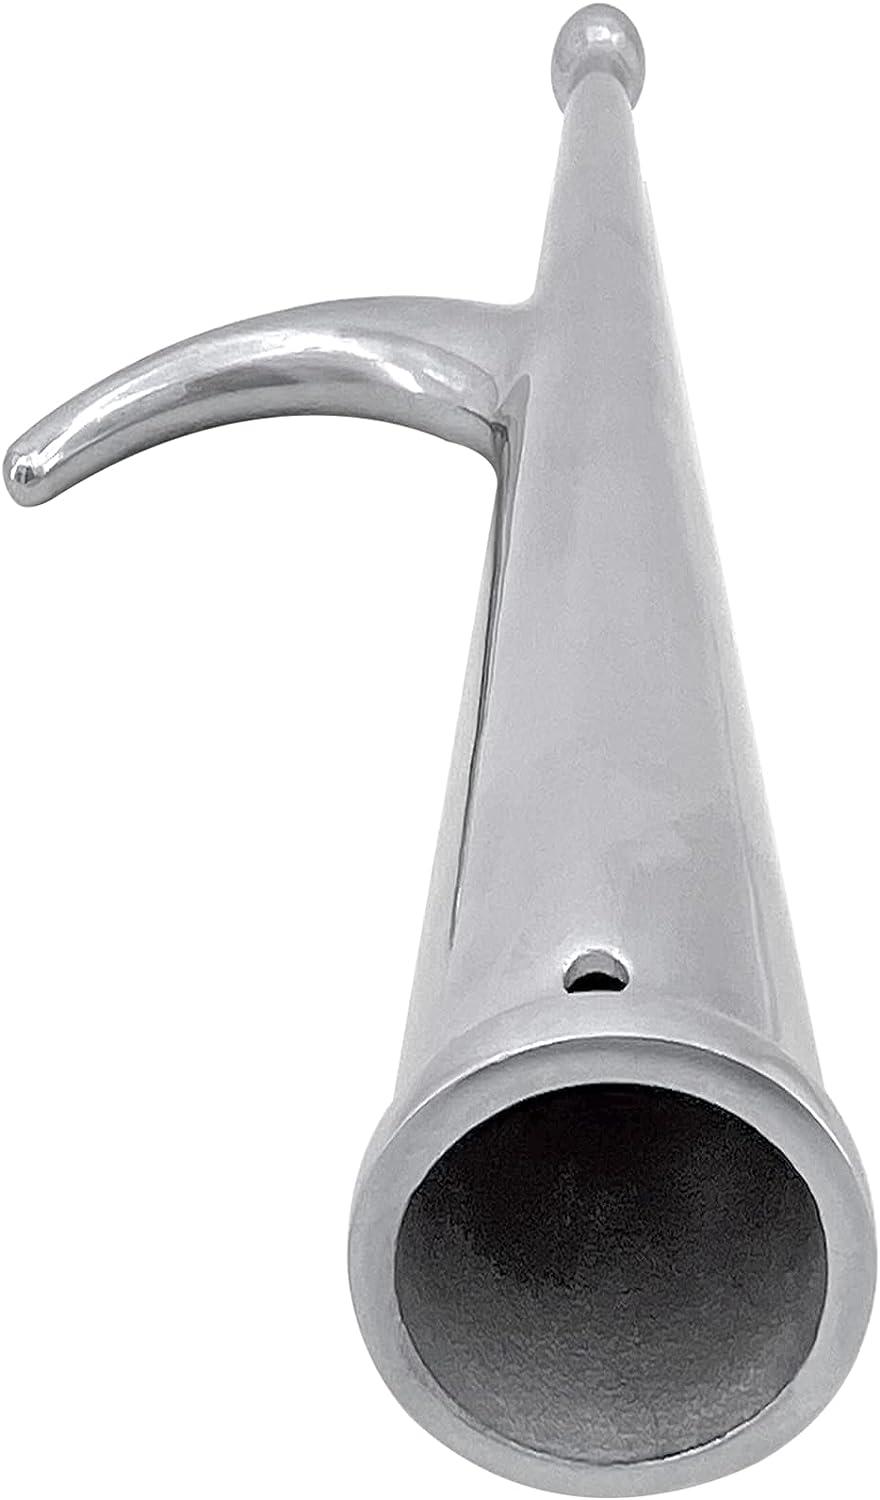 ISURE MARINE Stainless Steel Boat Hook Floating Hook for Extension  Pole,Unbreakable,Durable,Rust-Resistant Boat Hook Replacement Attachment